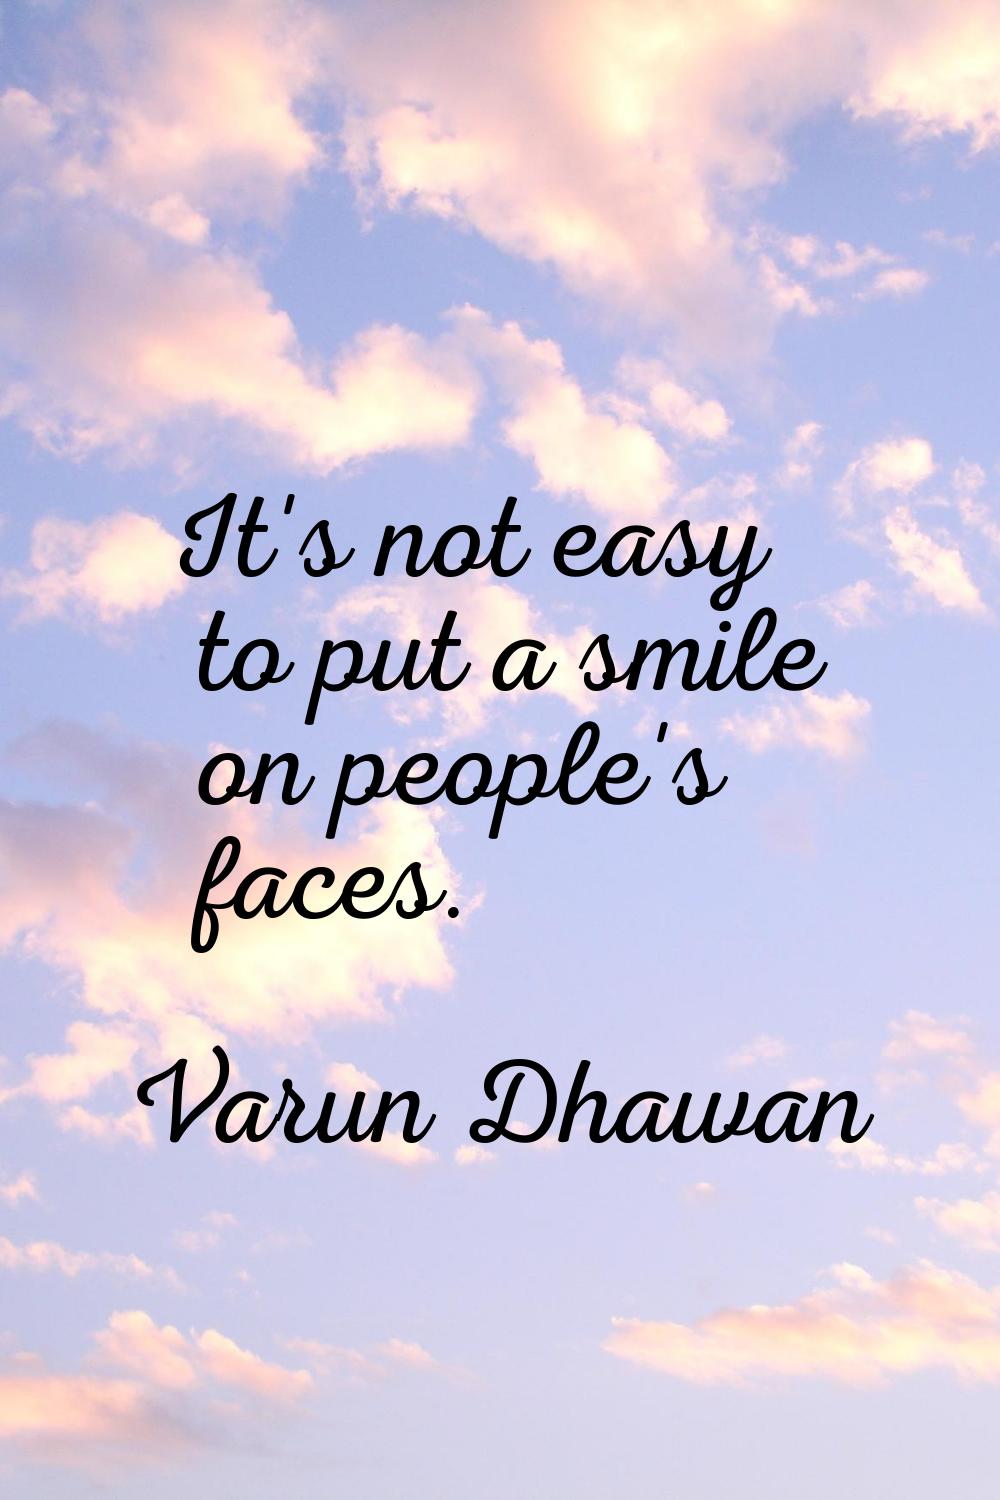 It's not easy to put a smile on people's faces.